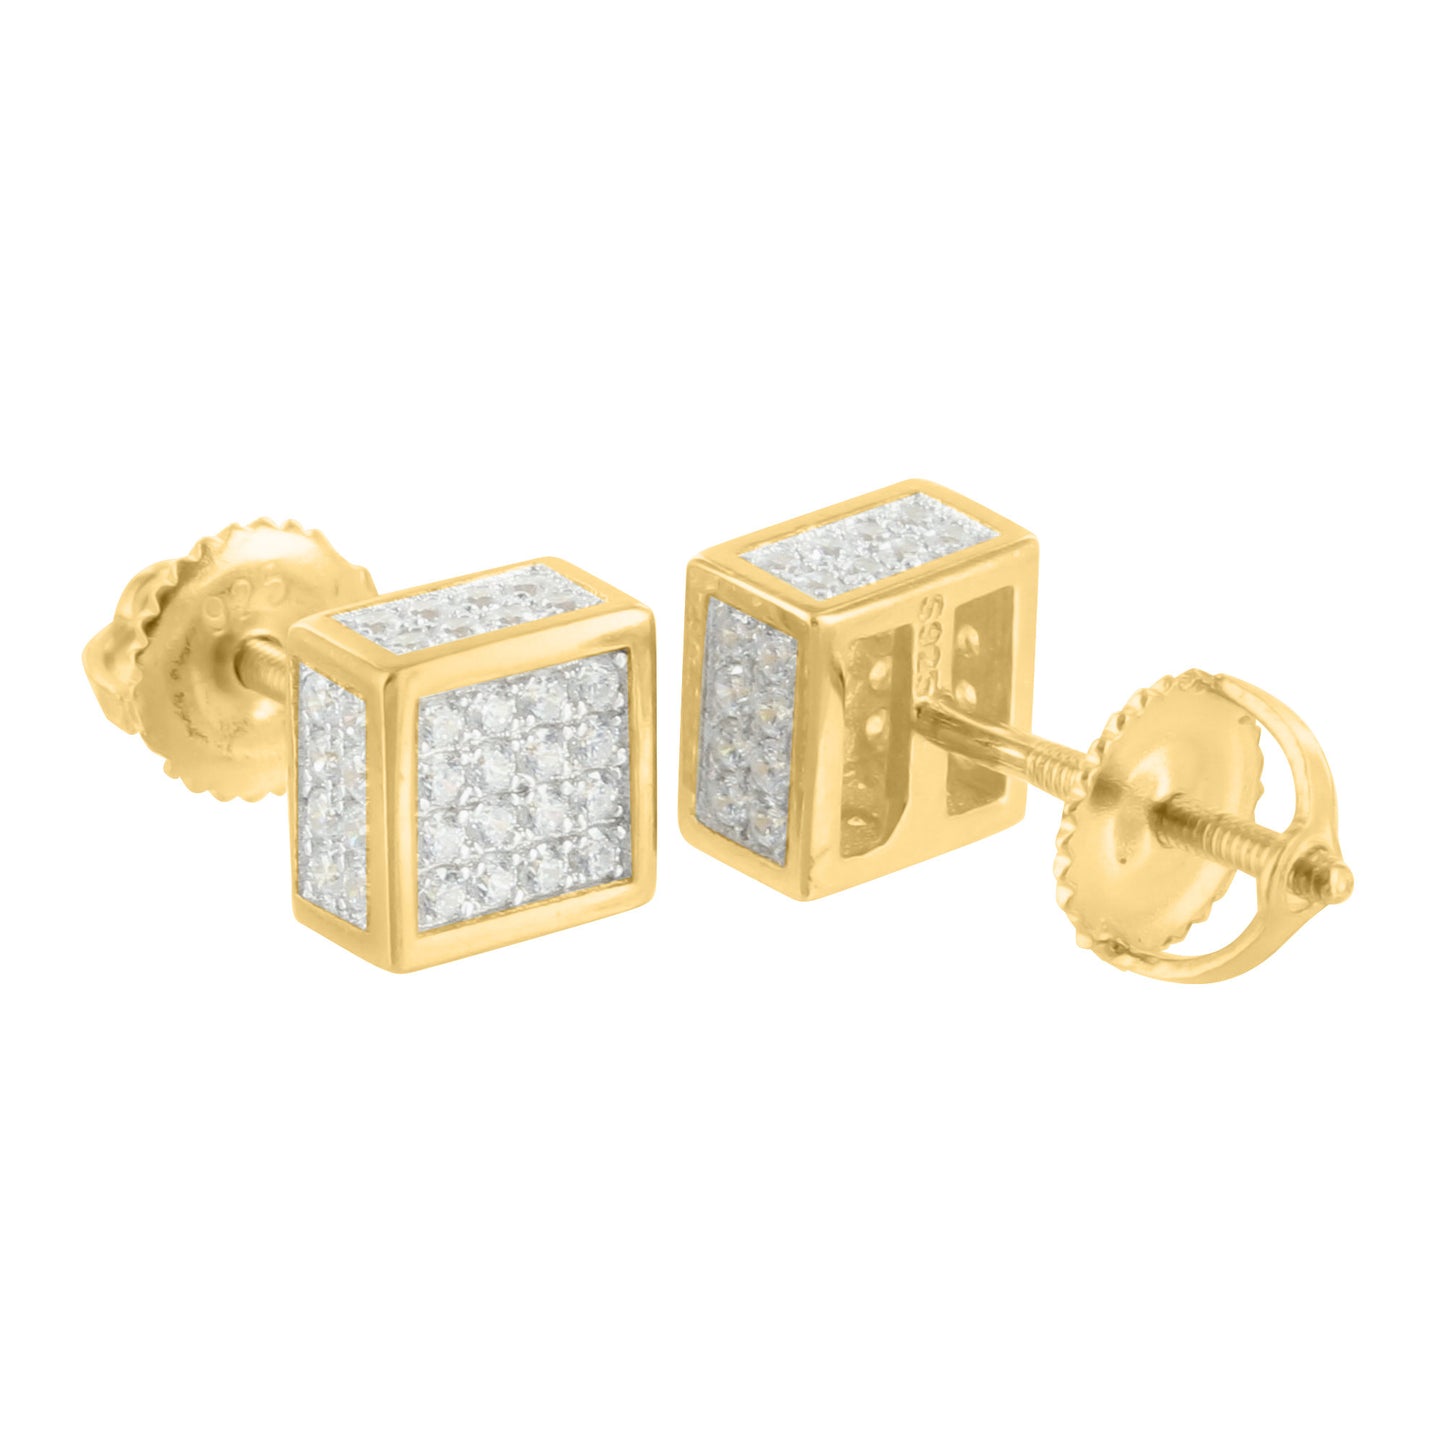 Mens Gold Finish Earrings Square Cube Style